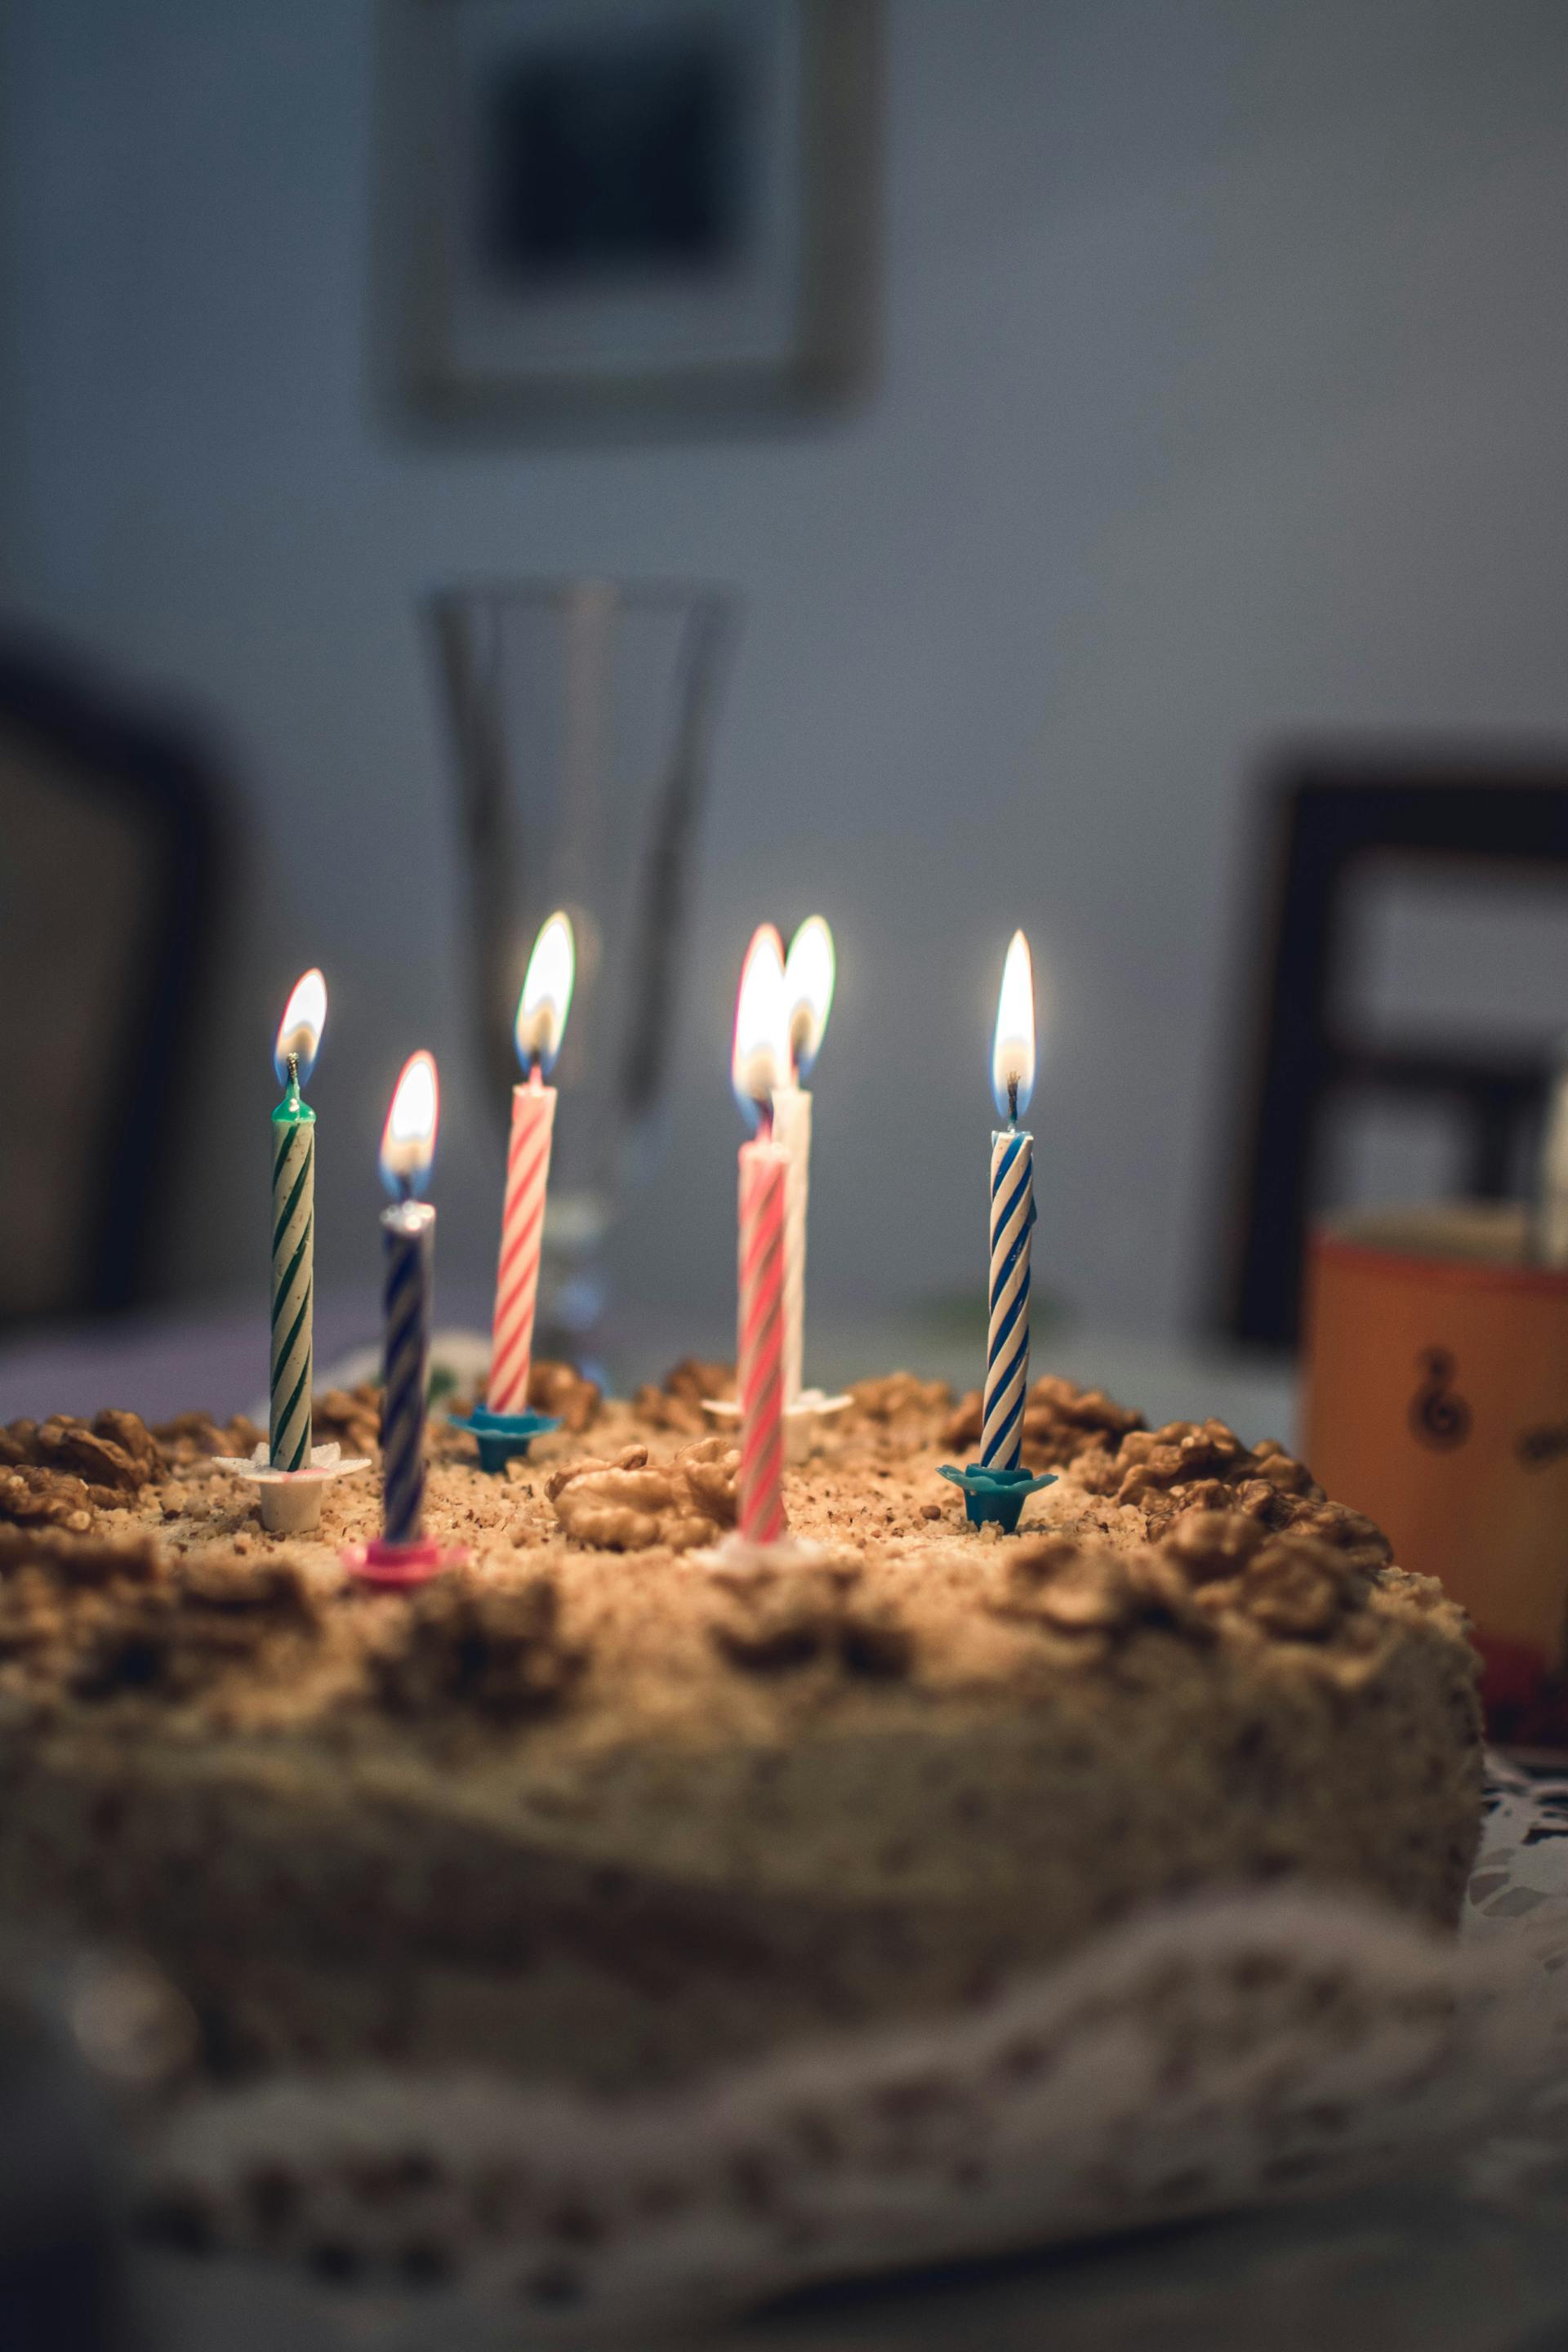 A birthday cake with candles alight | Source: Pexels